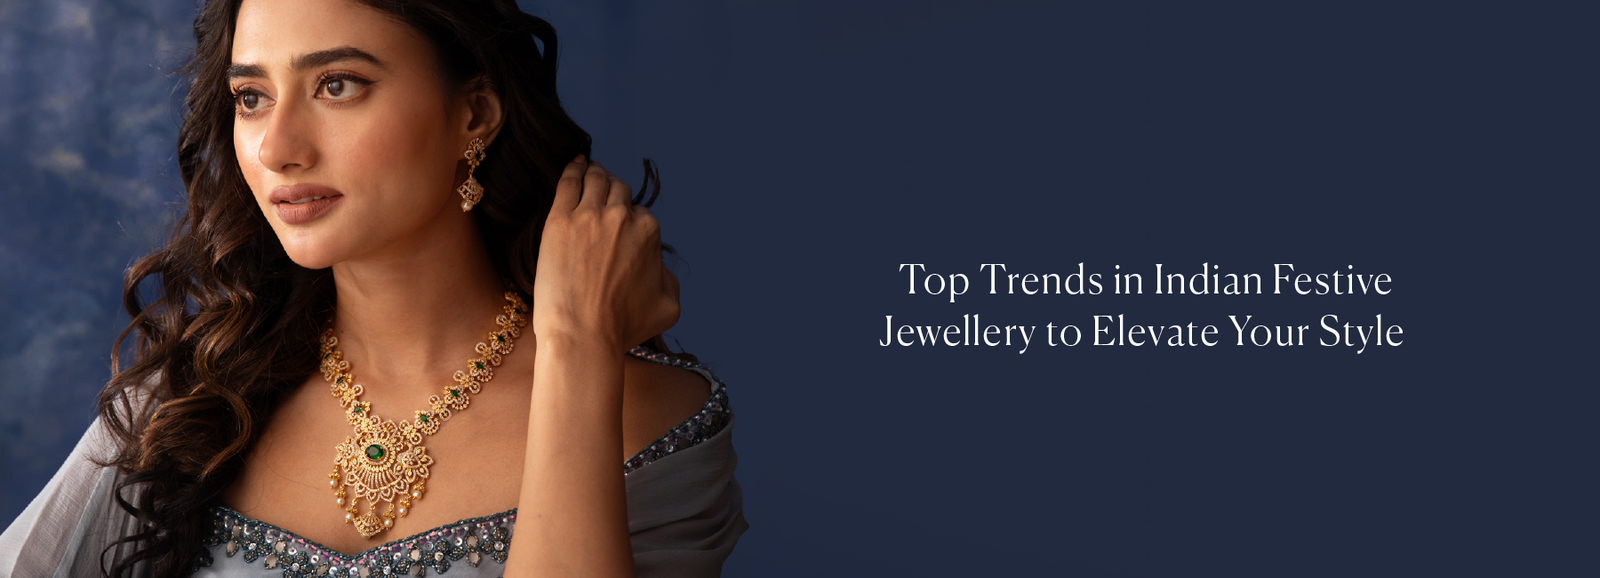 Top Trends in Indian Festive Jewellery to Elevate Your Style